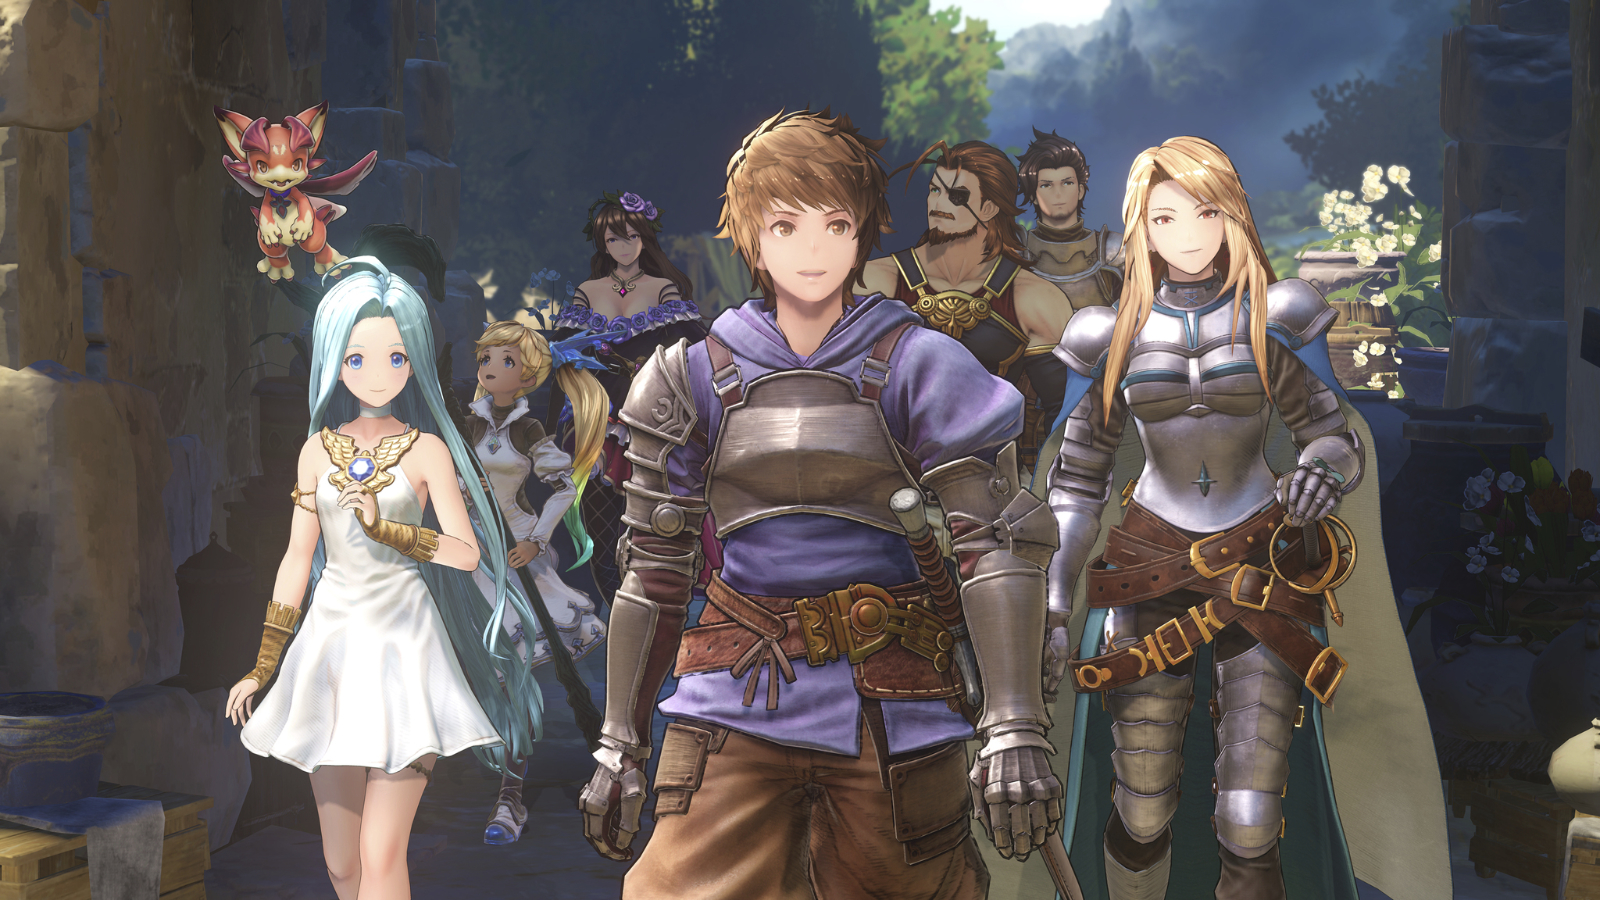 Granblue Fantasy: Relink Gets Gorgeous New Gameplay; Assist Modes Revealed